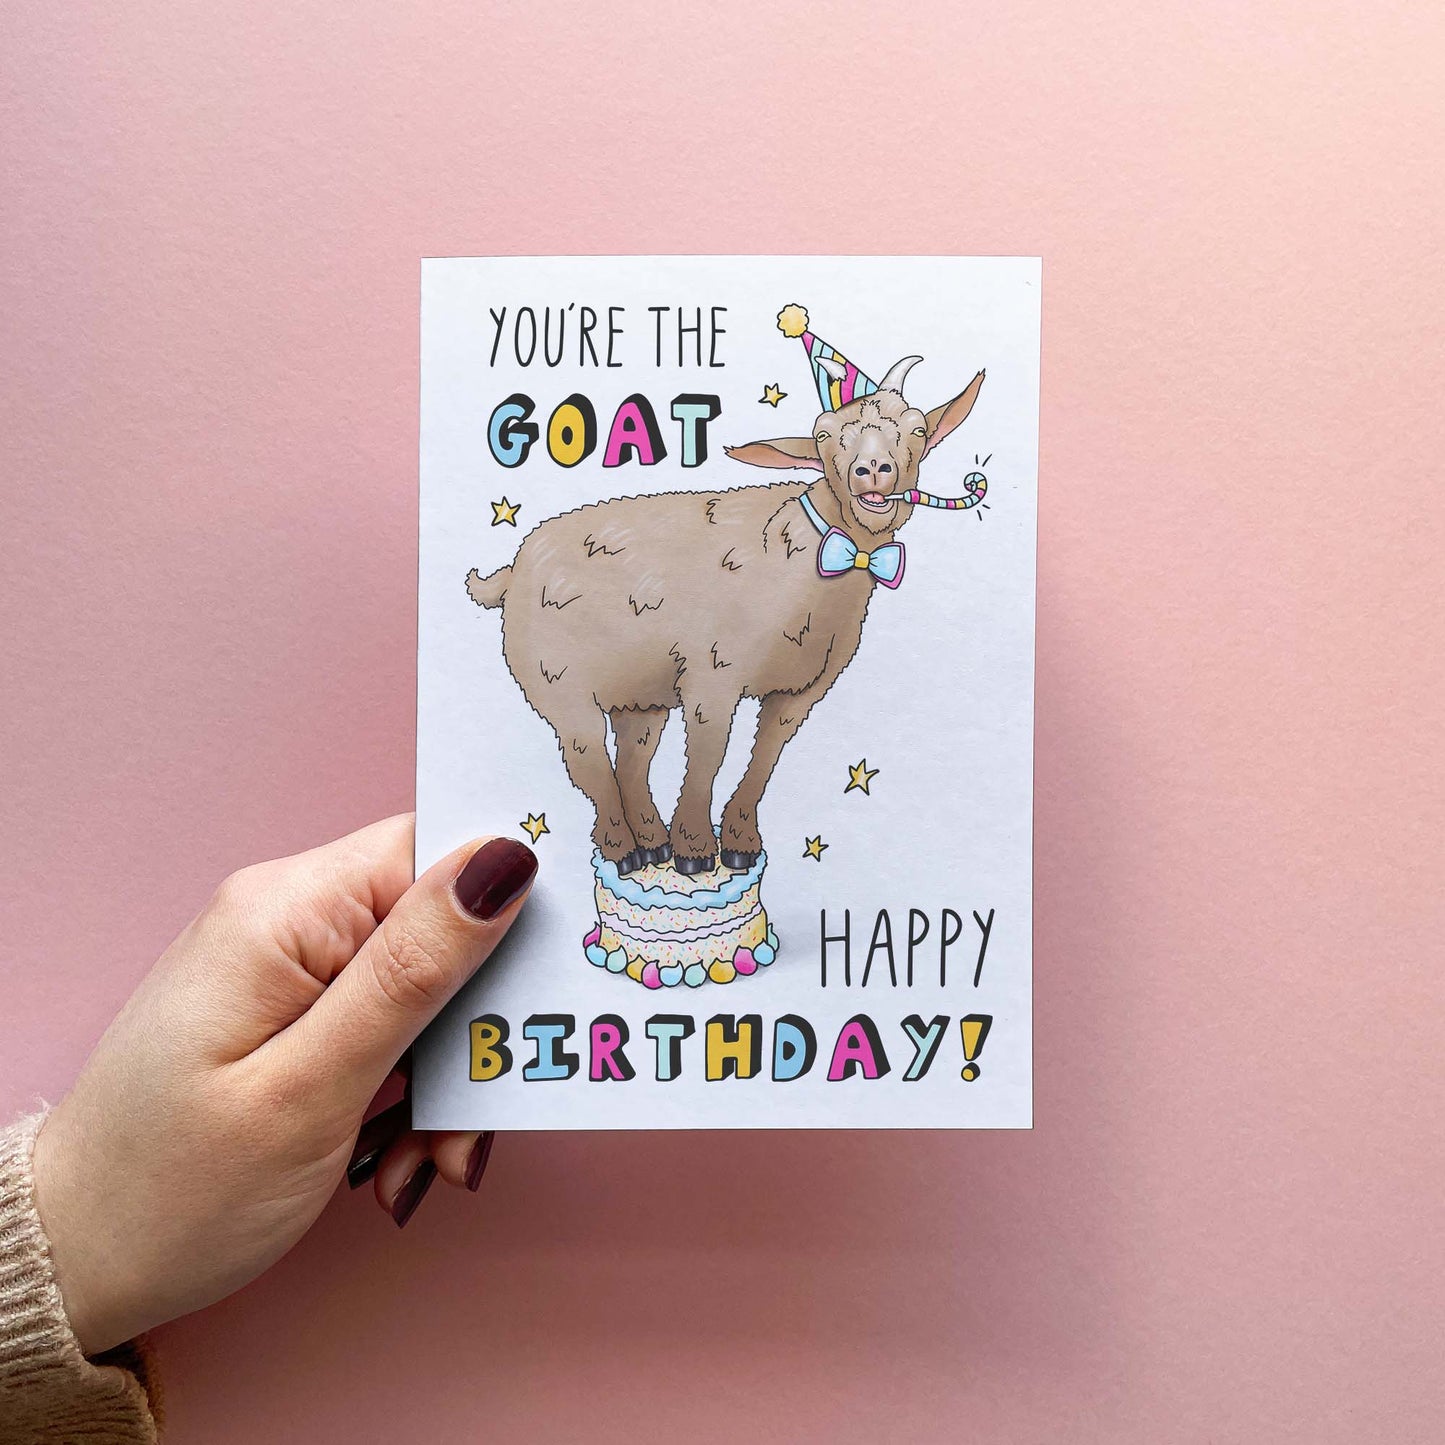 You're The Goat! - Happy Birthday Card